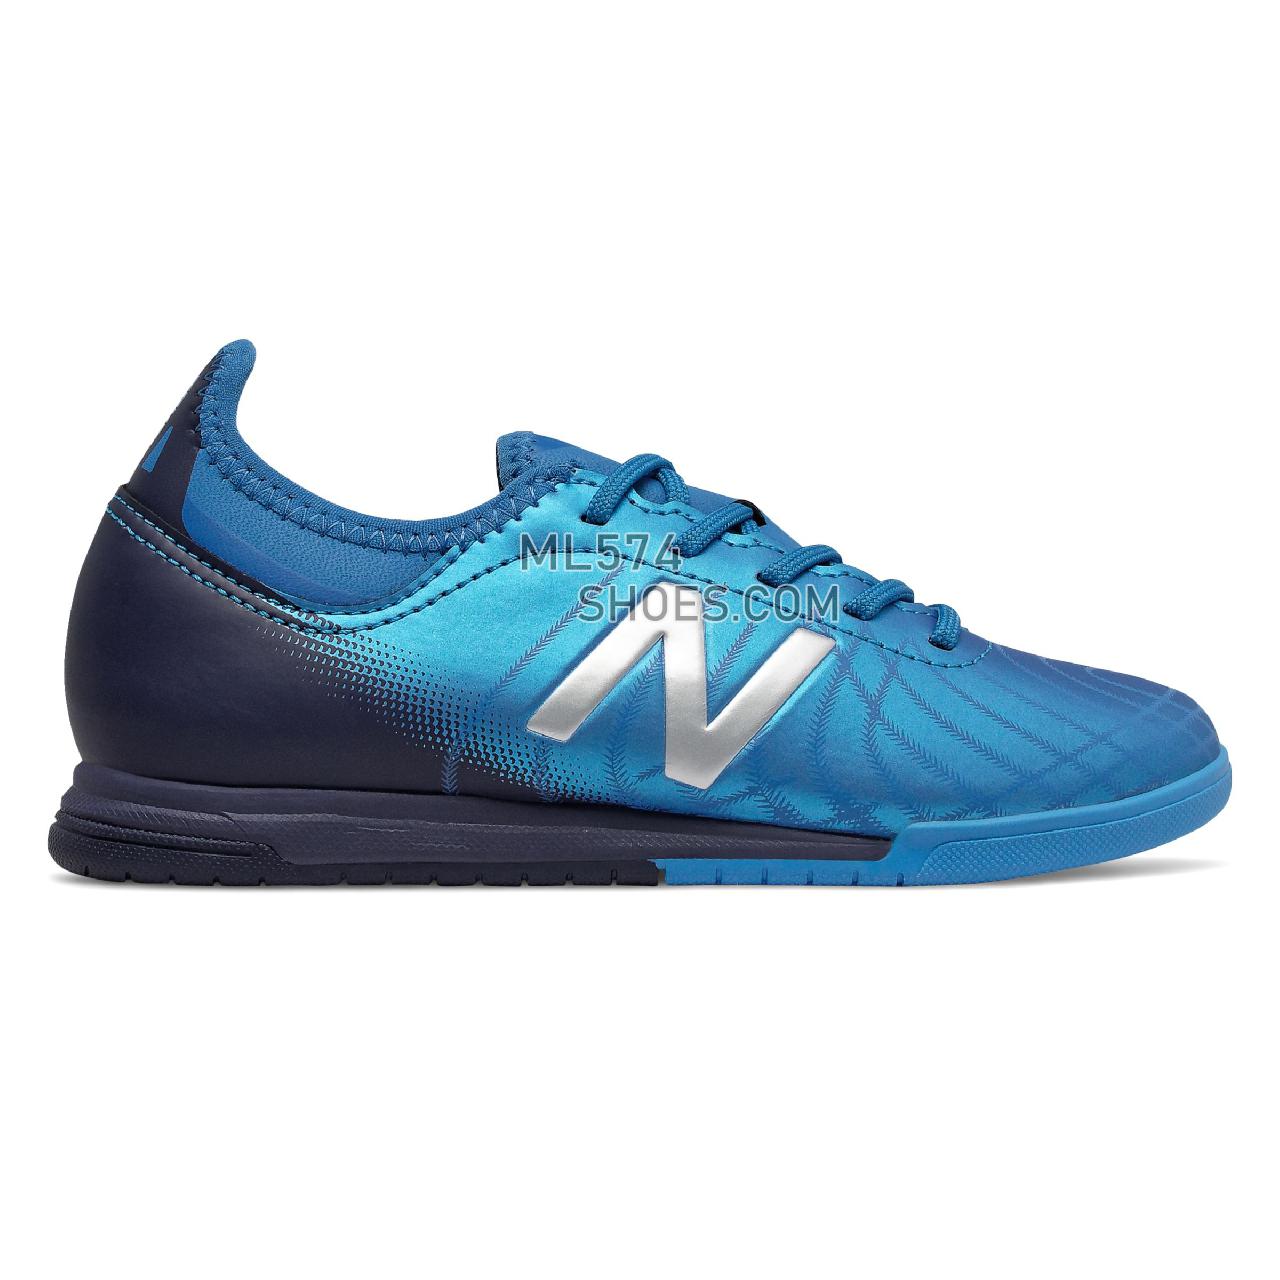 New Balance TEKELA V2 MAGIQUE JNR IN - Unisex Men's Women's Indoor FootBall Boots - Vision blue with neo classic blue and team navy - JSTTIVC2